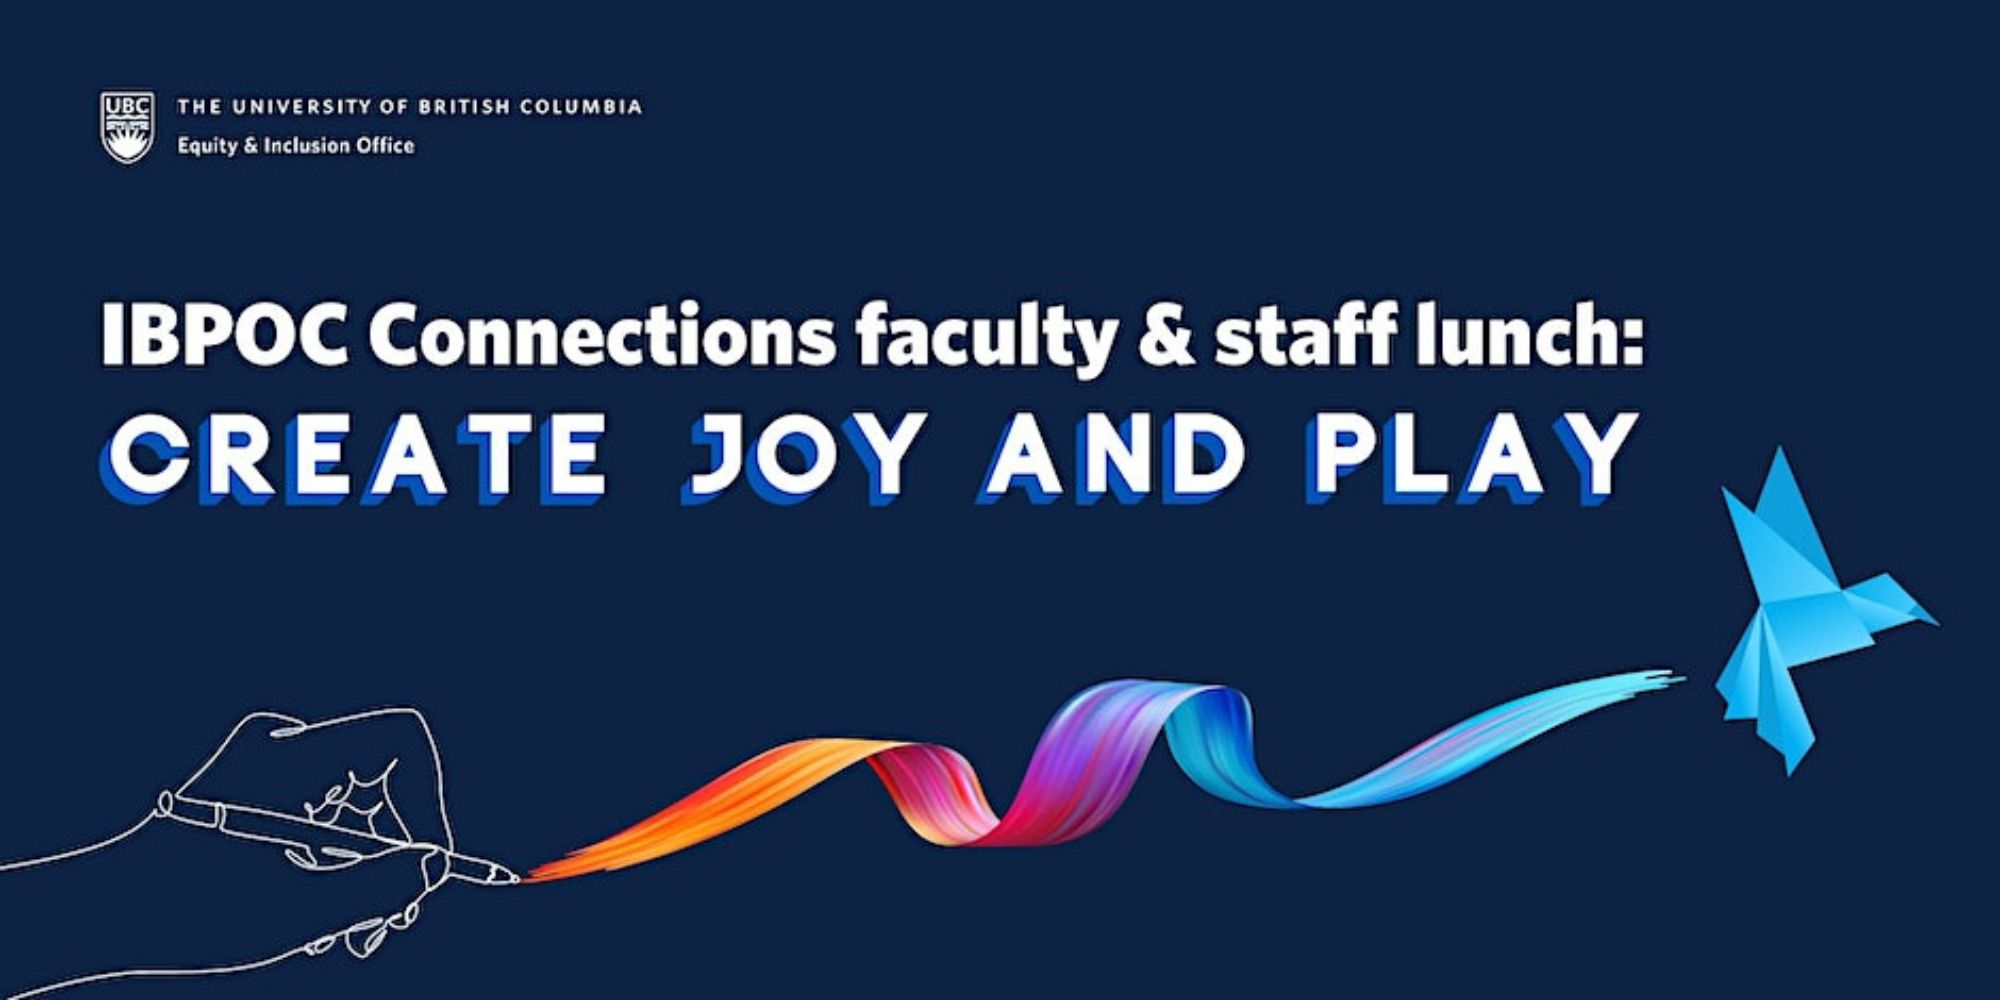 IBPOC Connections faculty & staff lunch: Create joy and play (March 9)